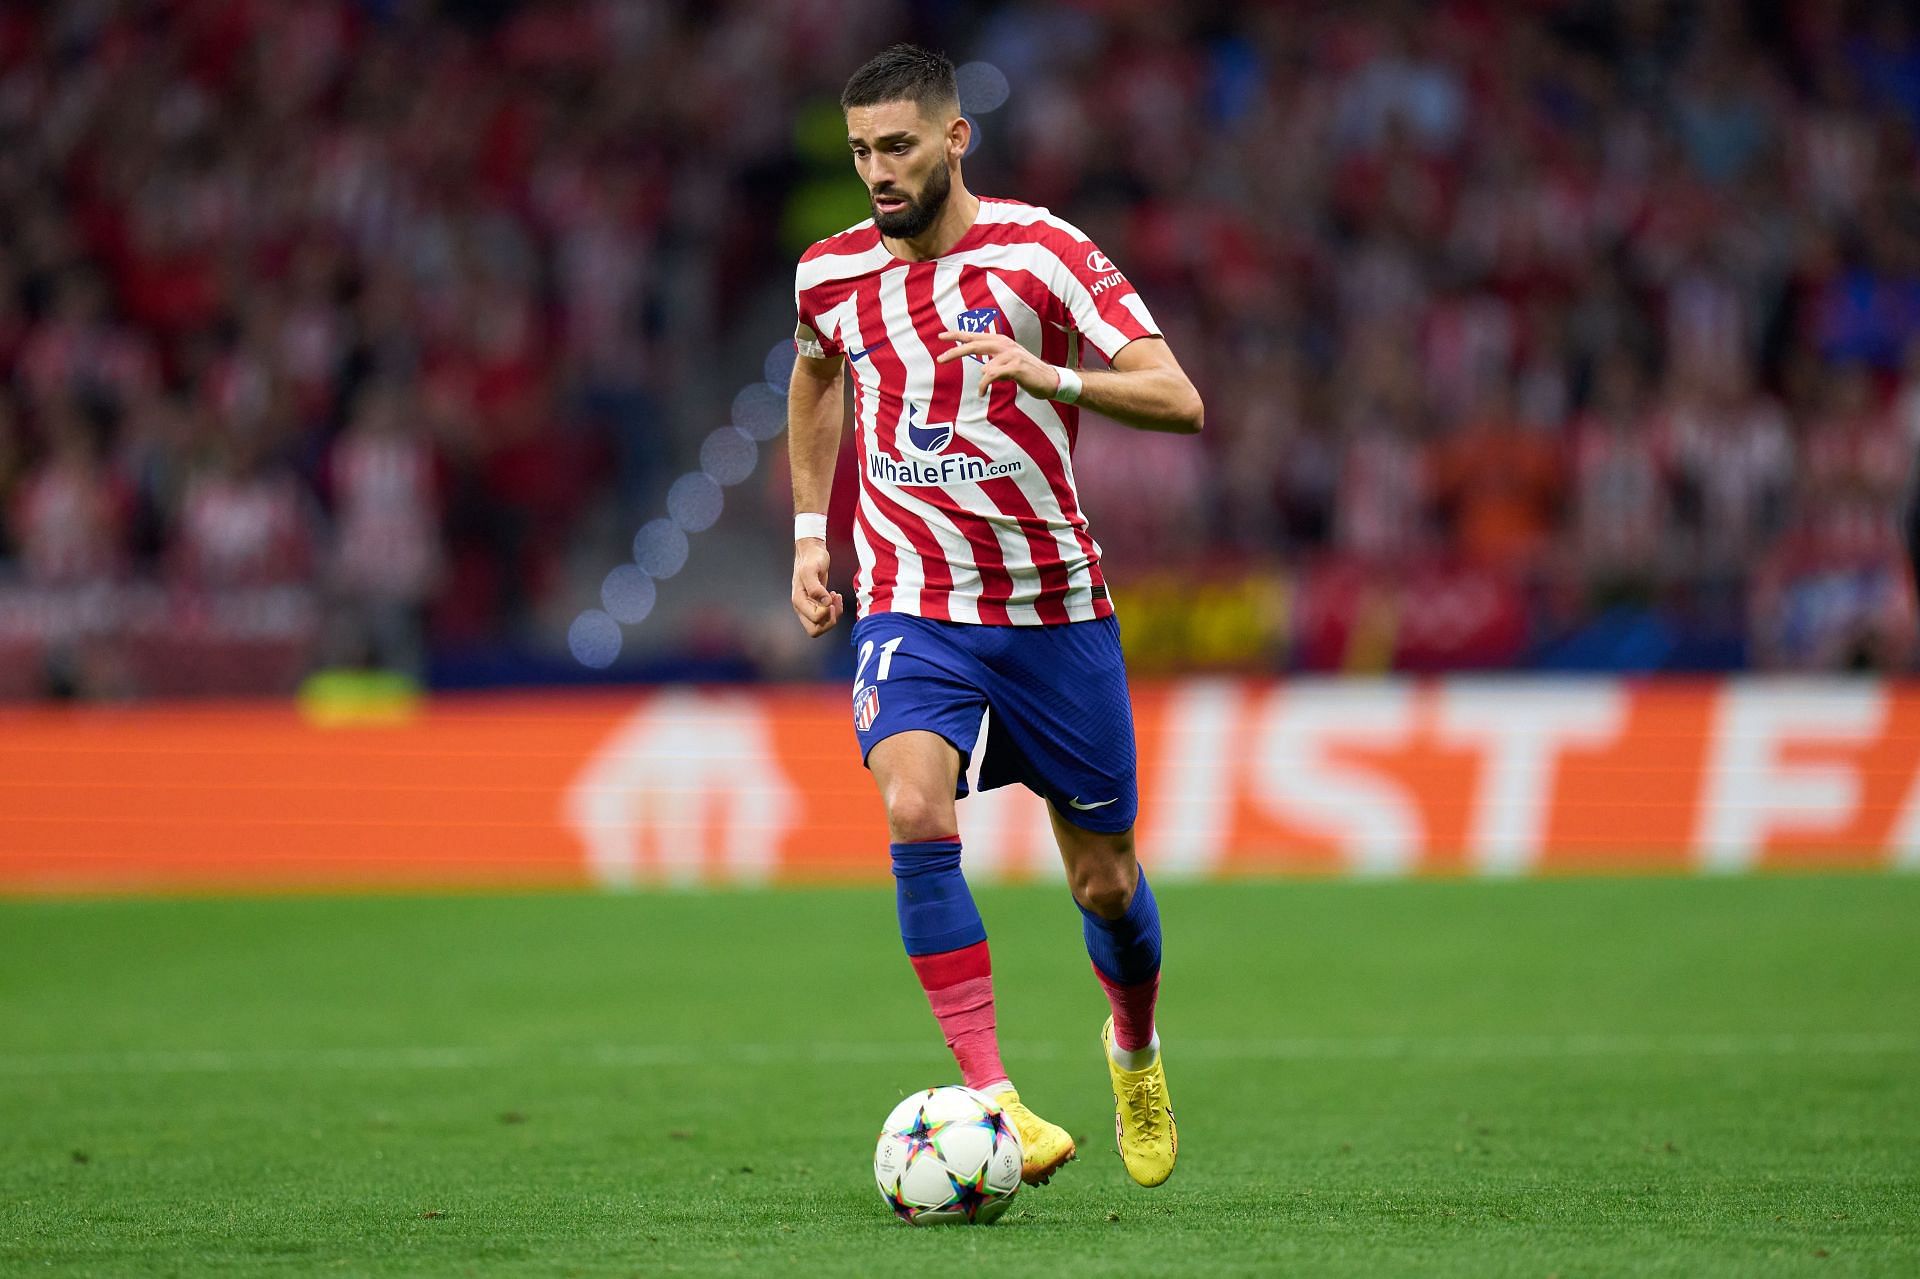 Yannick Carrasco is likely to depart the Wanda Metropolitano this year.